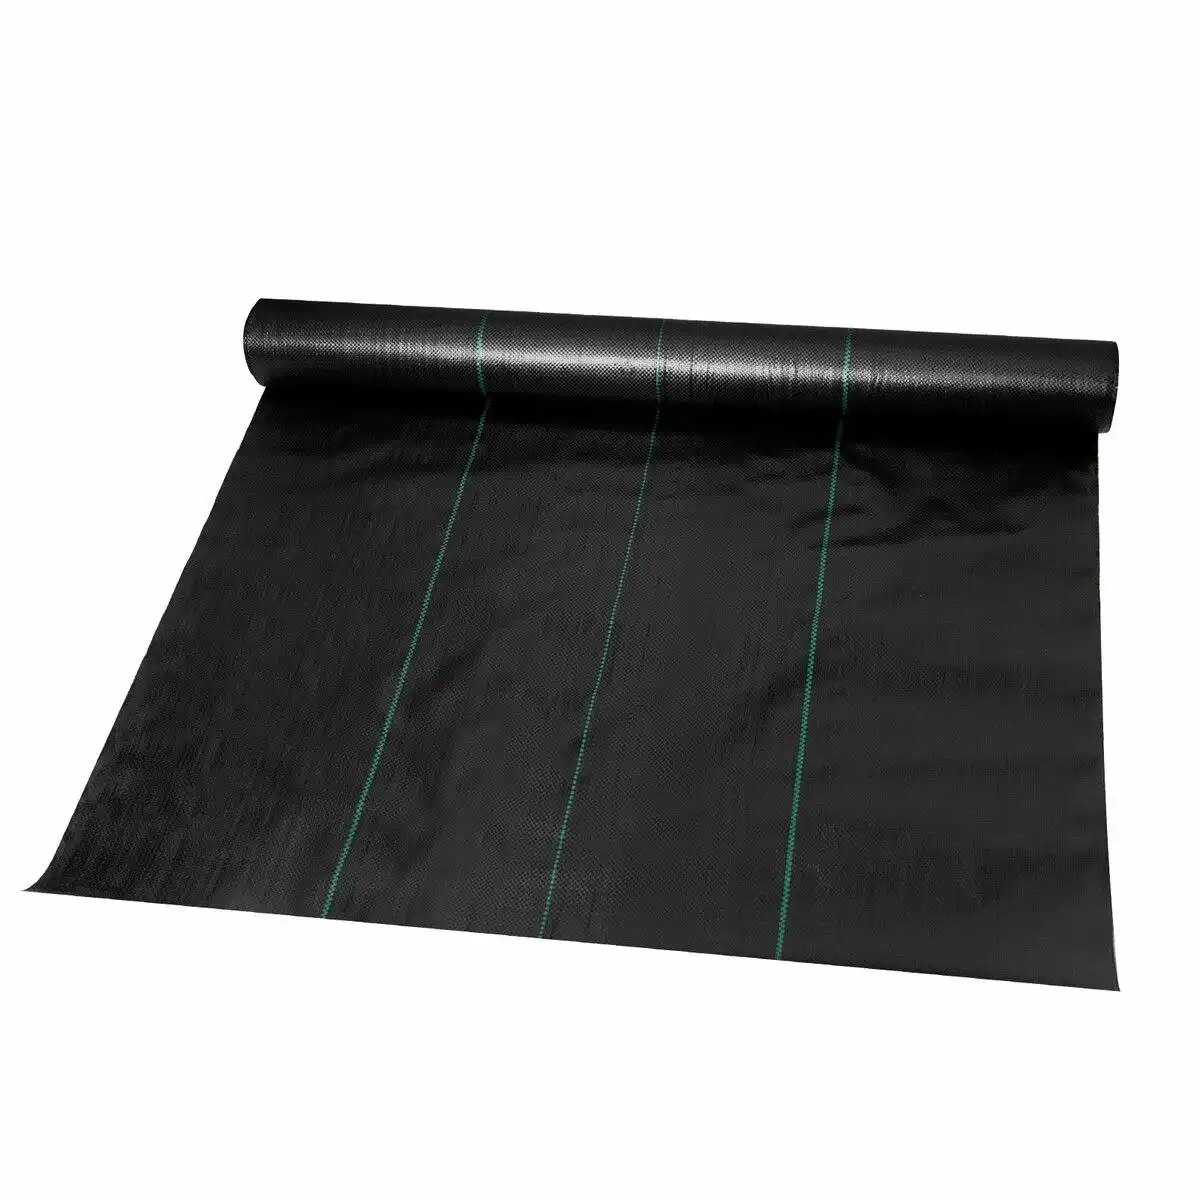 OGL Weed Control Mat Barrier Gardening Ground Cover Landscape Plastic Block Guard 80GSM 1.83 x 50 M